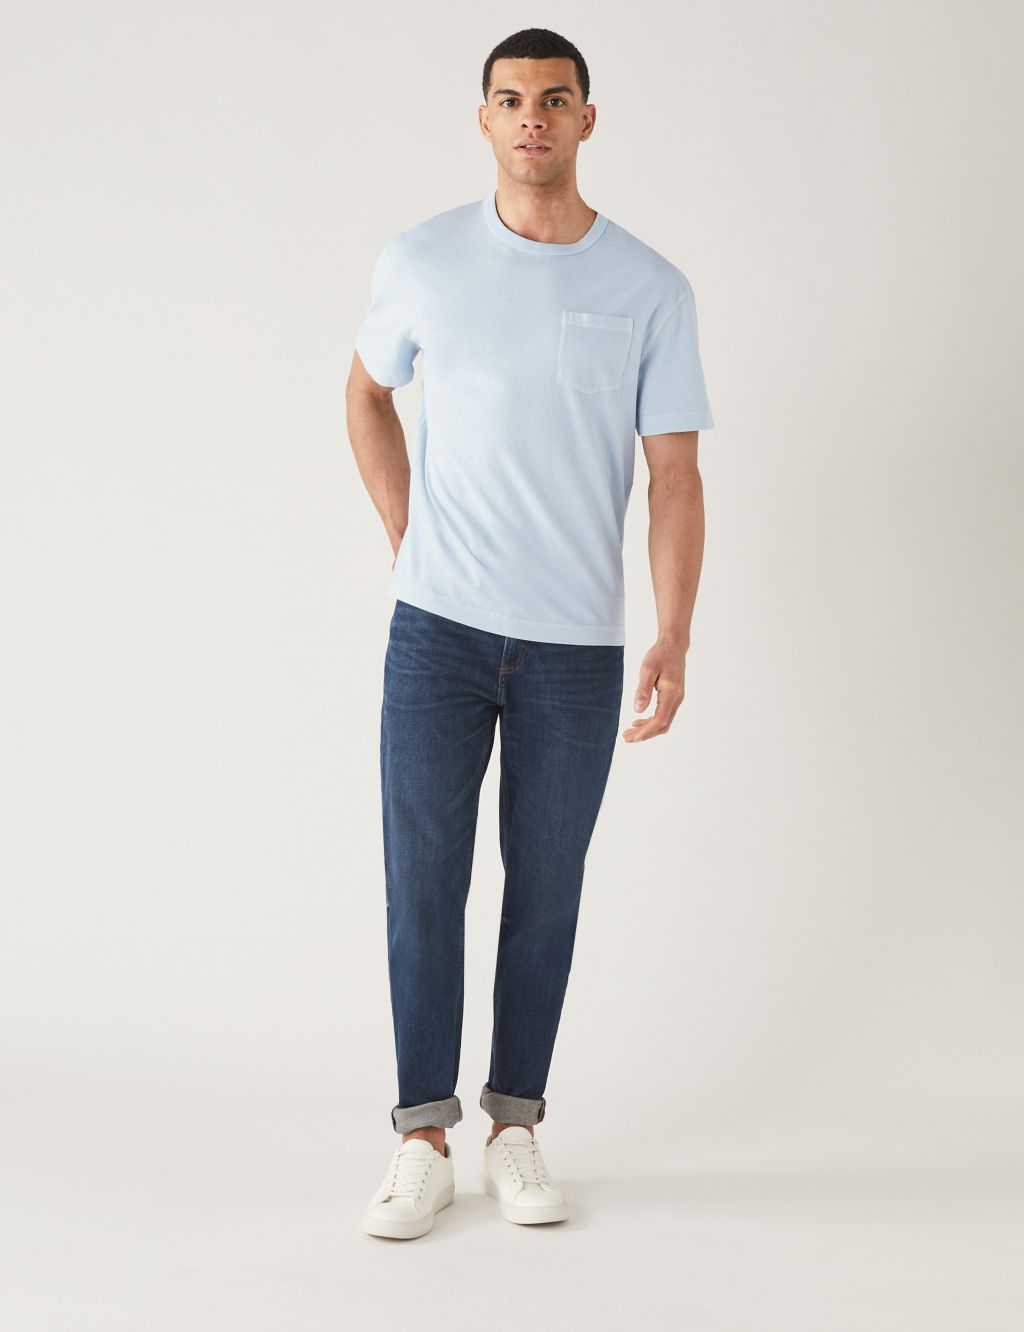 Relaxed Fit Pure Cotton Crew Neck T-Shirt image 2